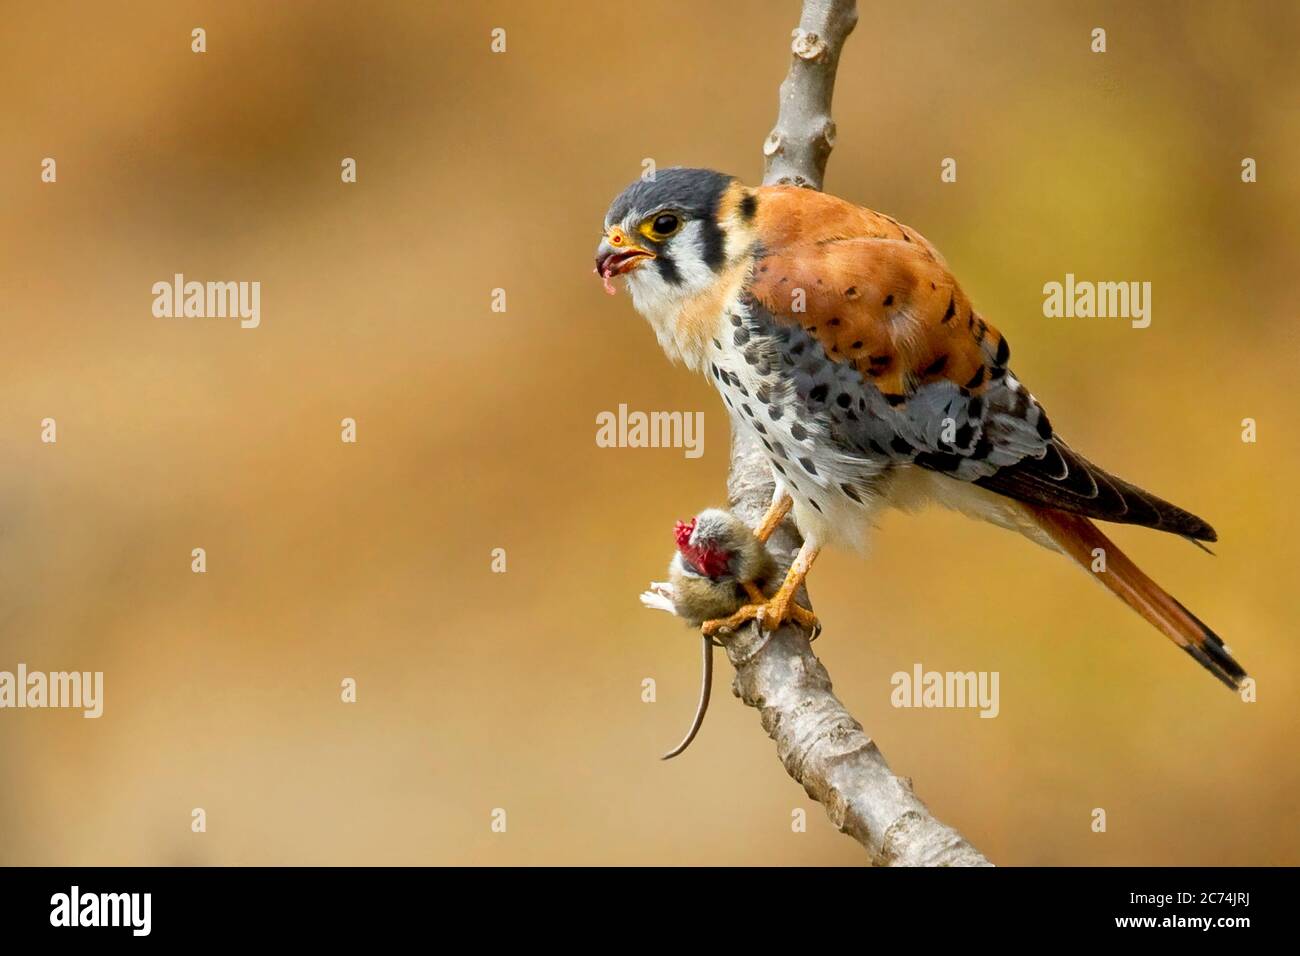 American kestrel (Falco sparverius), eating a rodent, North America Stock Photo